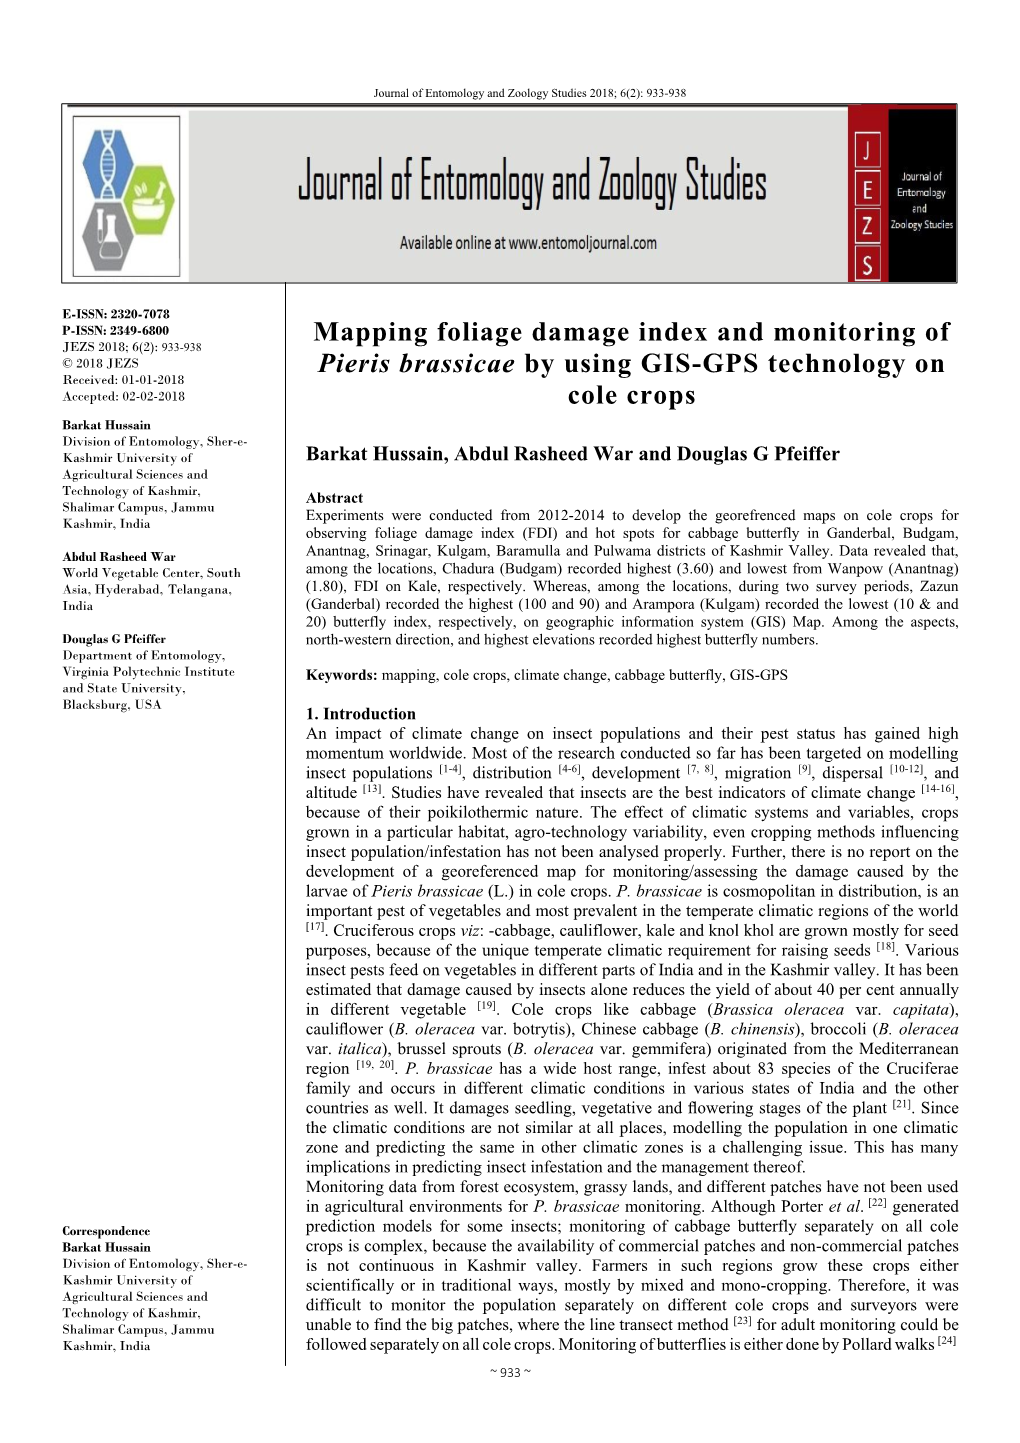 Mapping Foliage Damage Index and Monitoring of Pieris Brassicae by Using GIS-GPS Technology on Cole Crops